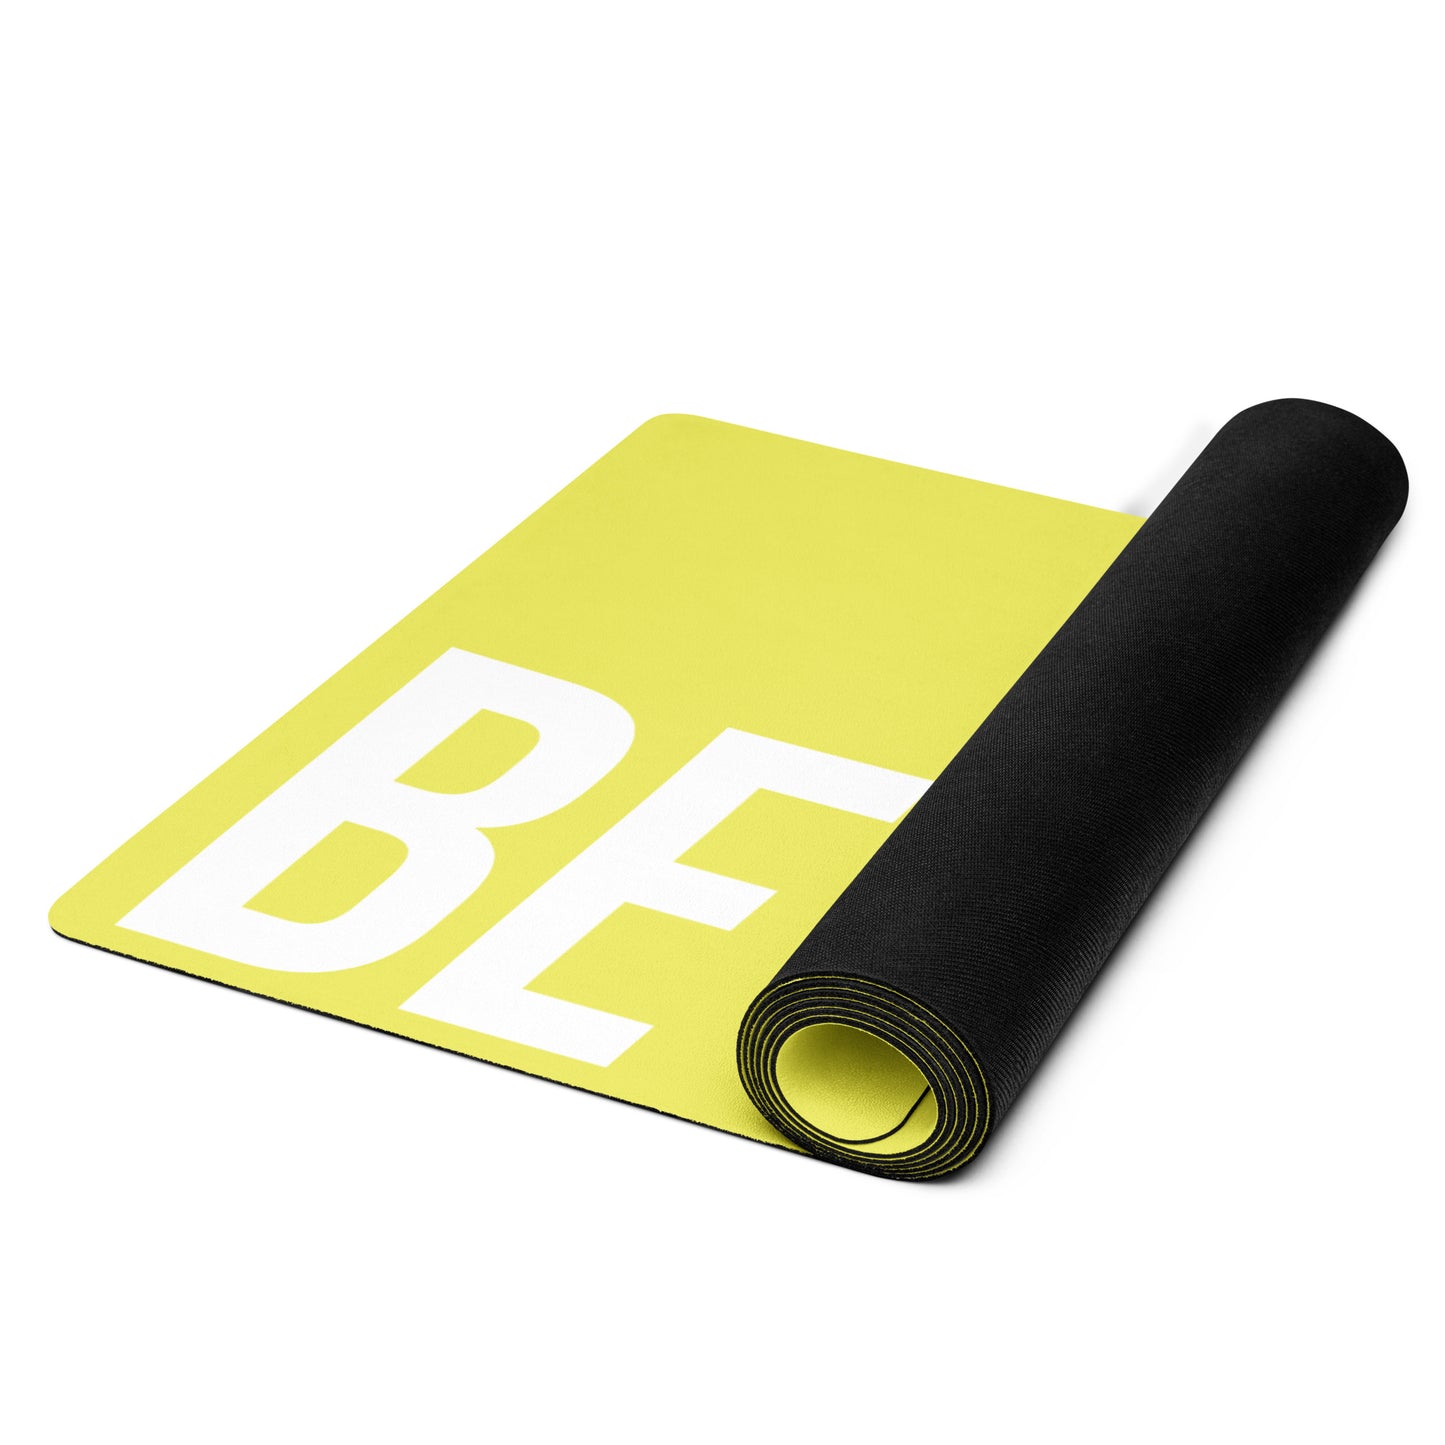 Yoga mat "BE WISE"